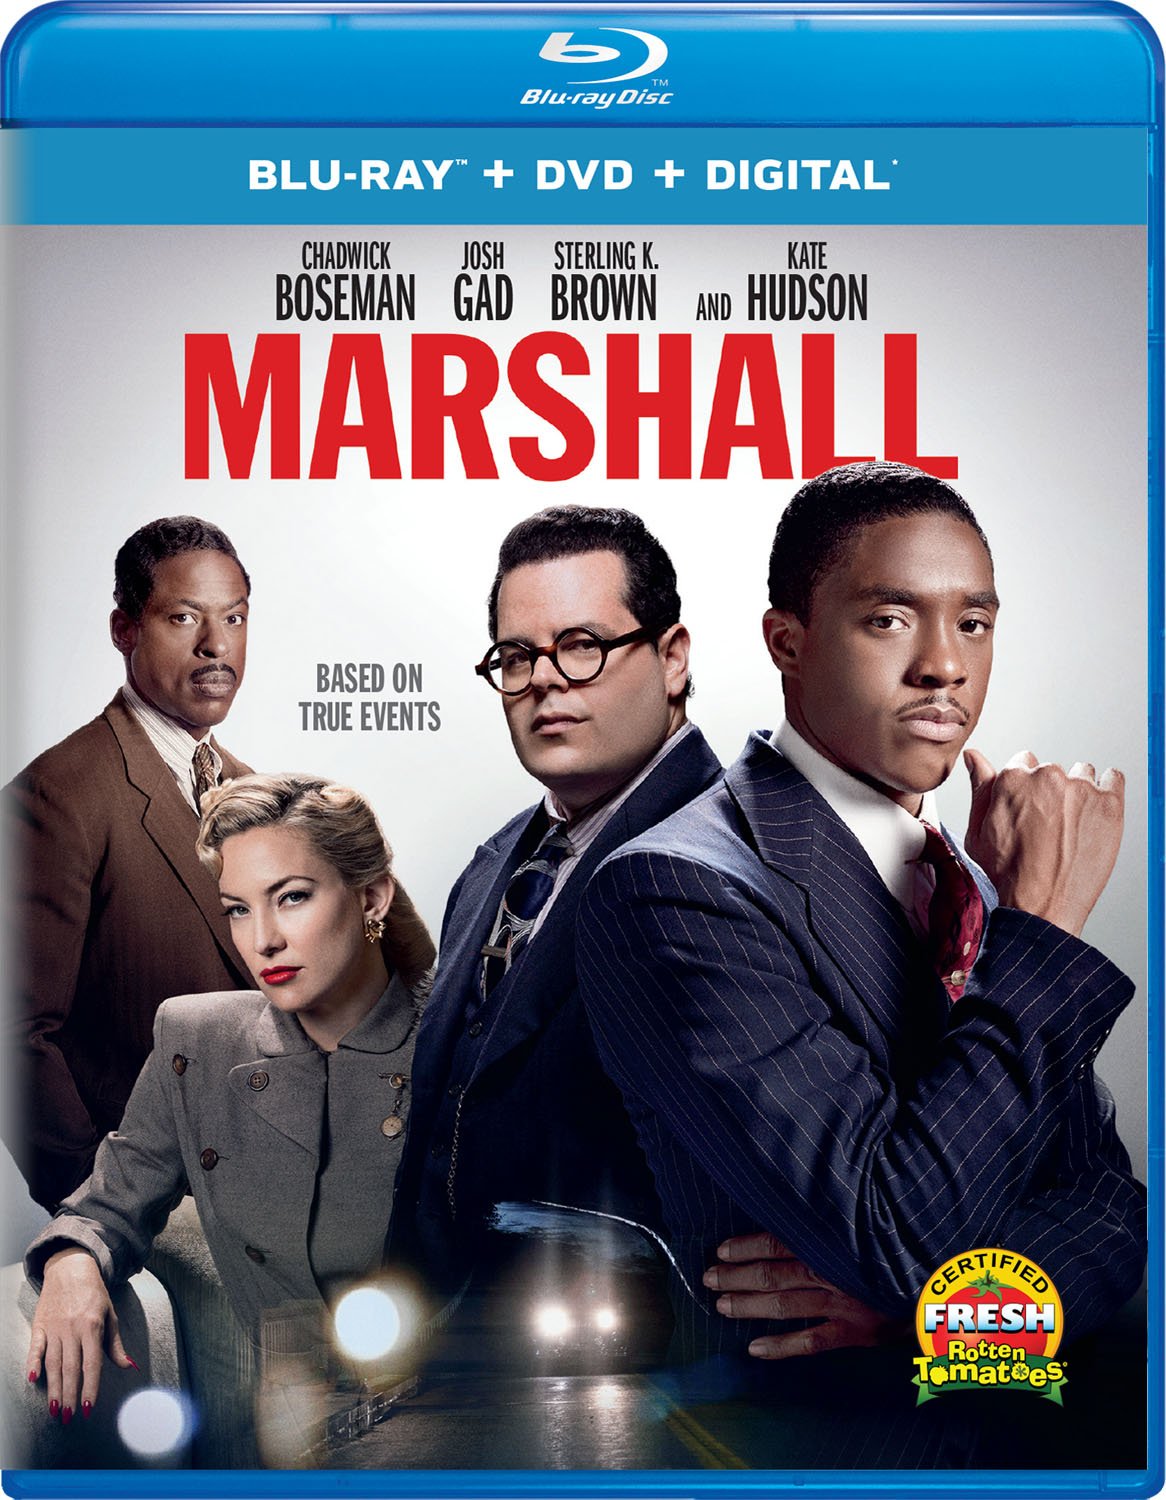 Marshall DVD Release Date January 9, 2018